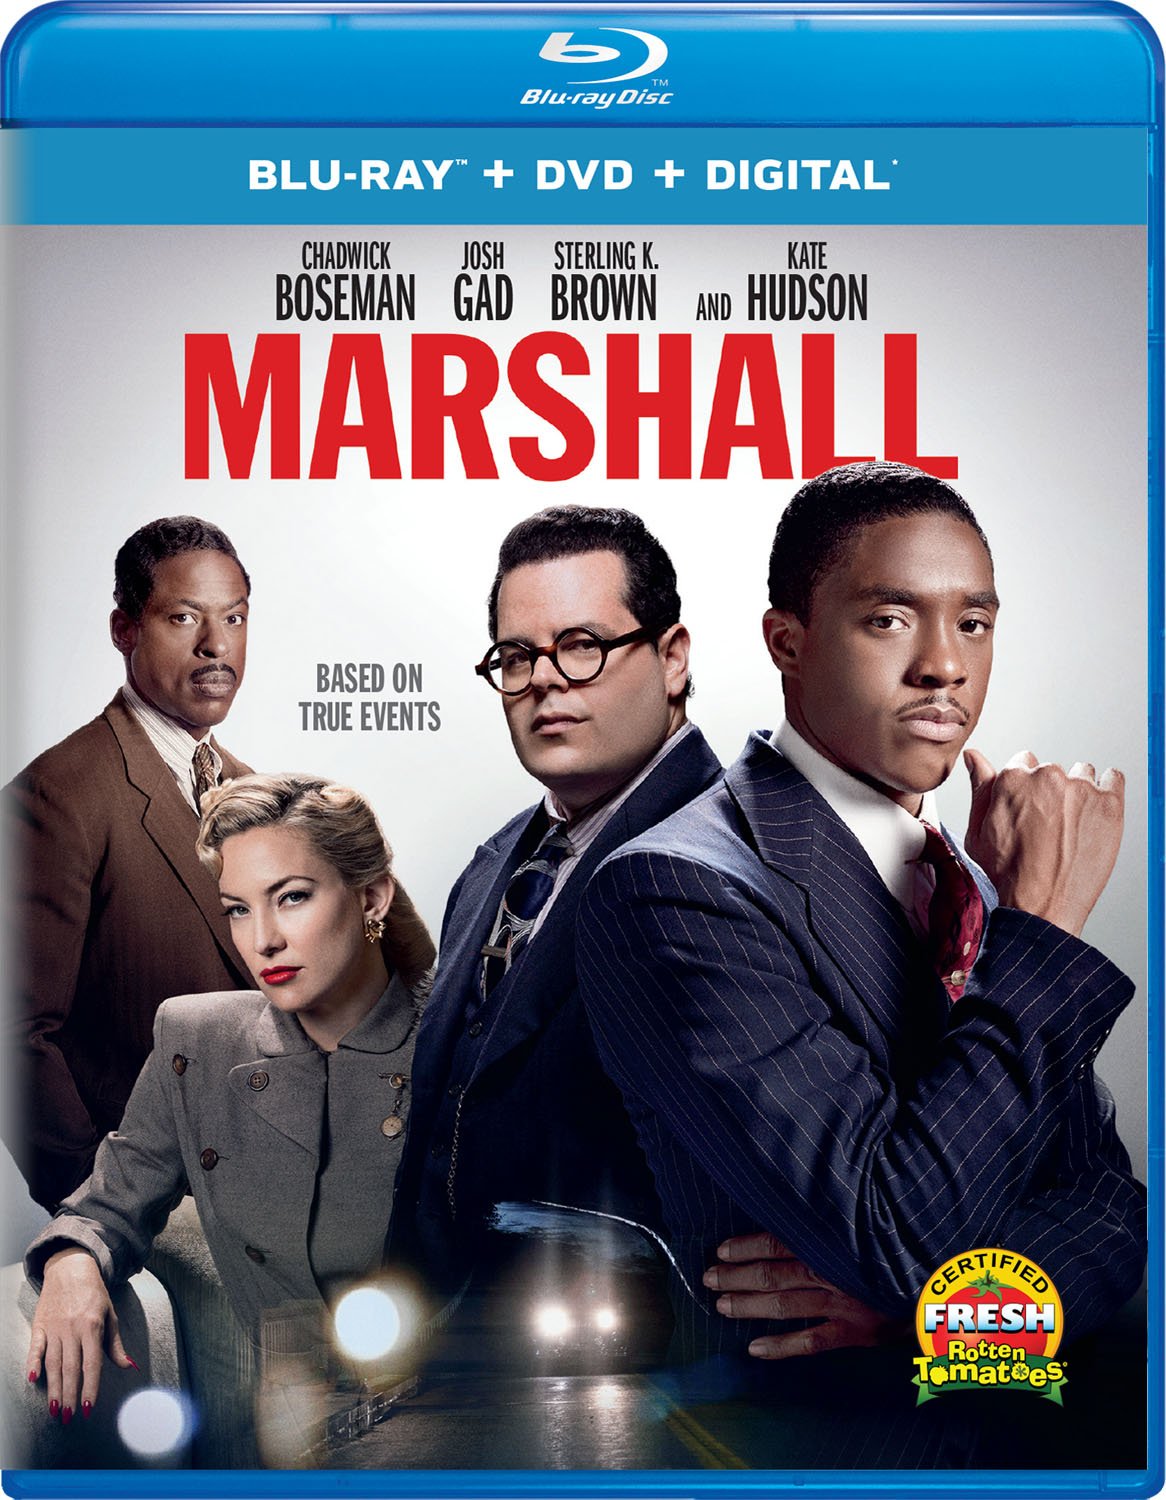 Marshall DVD Release Date January 9, 2018